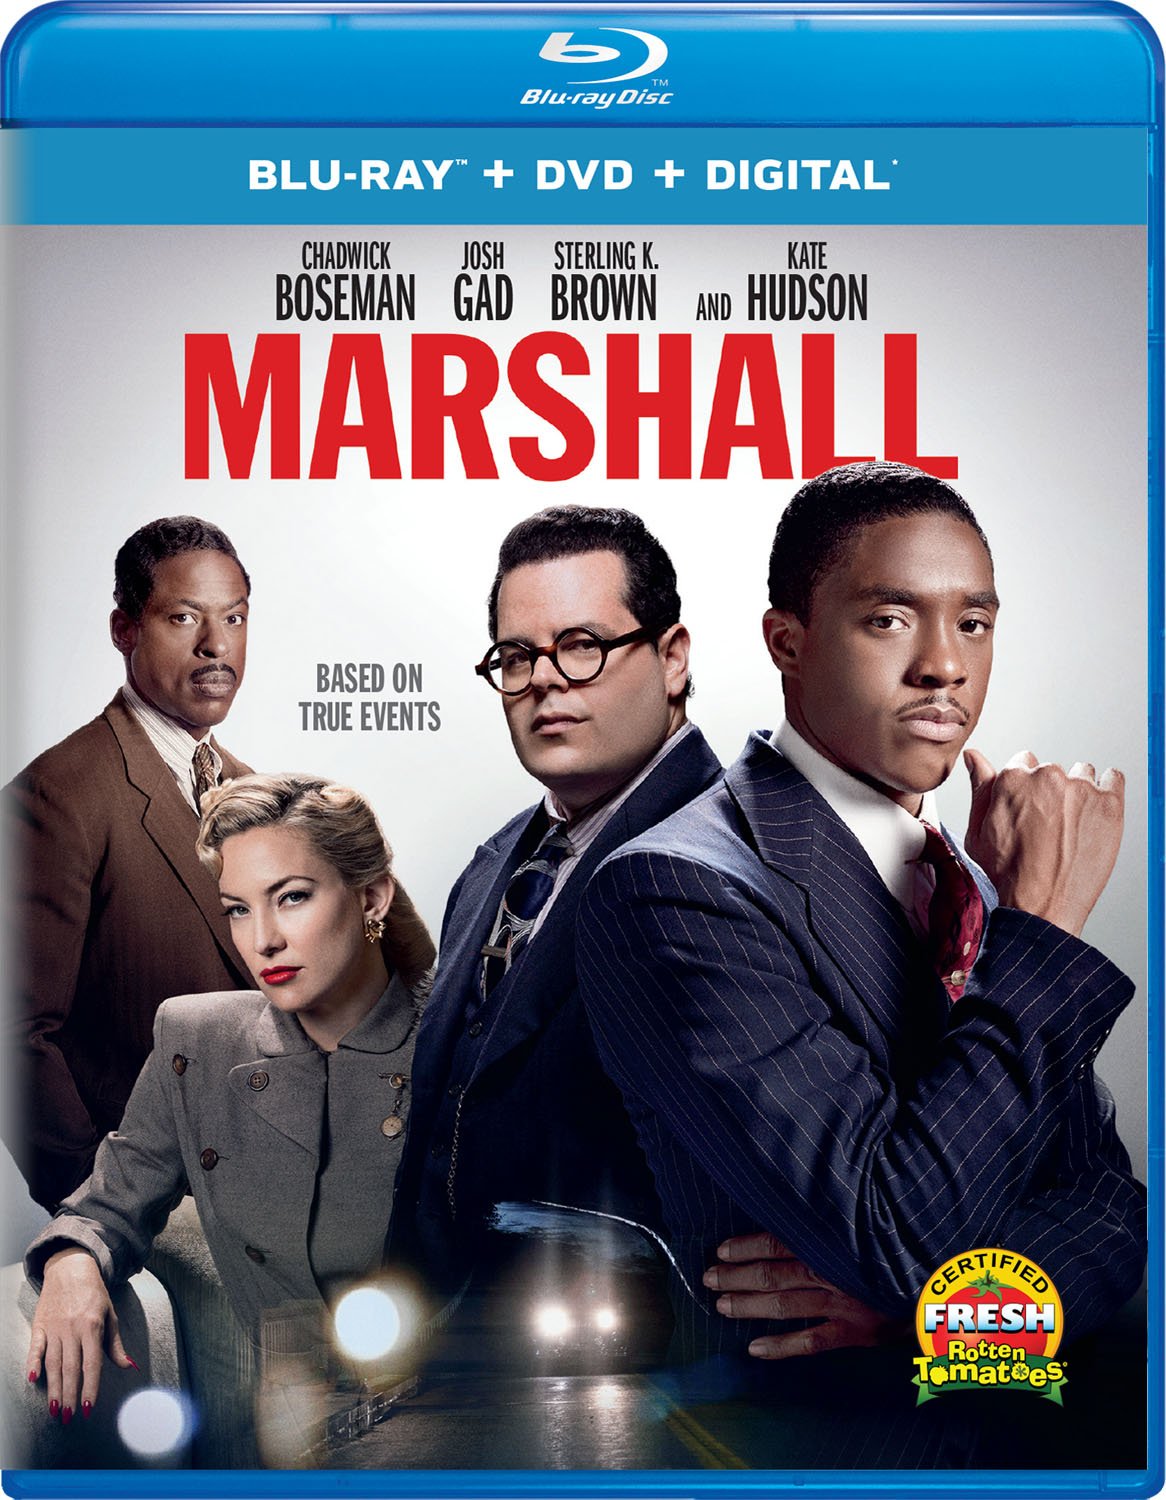 Marshall DVD Release Date January 9, 2018